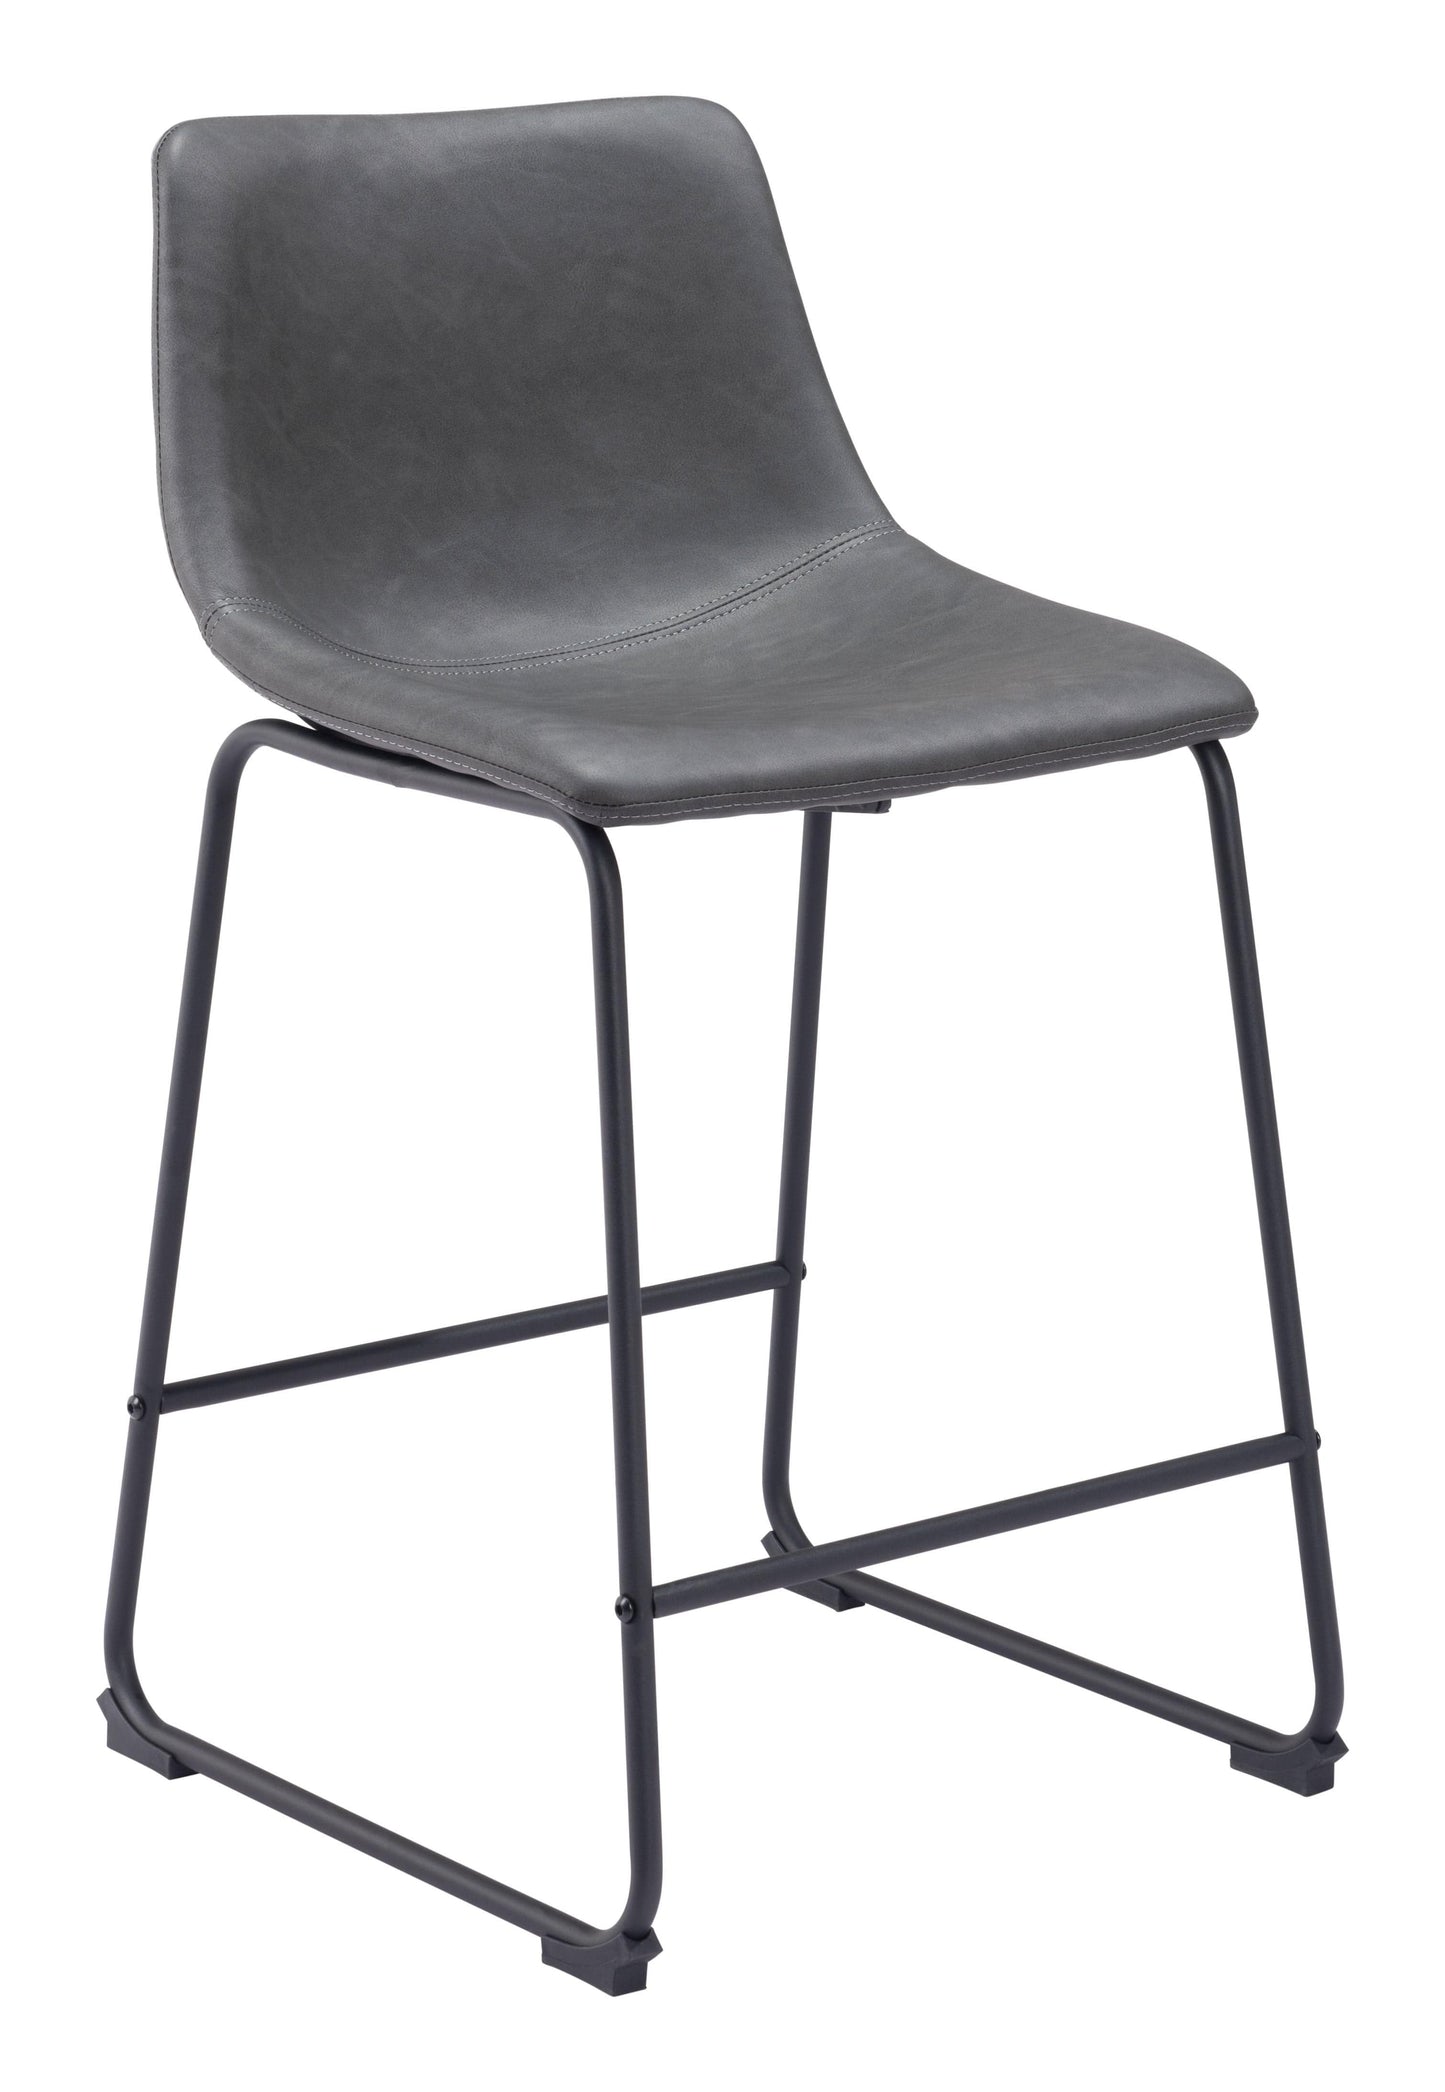 Angled view of transitional stool